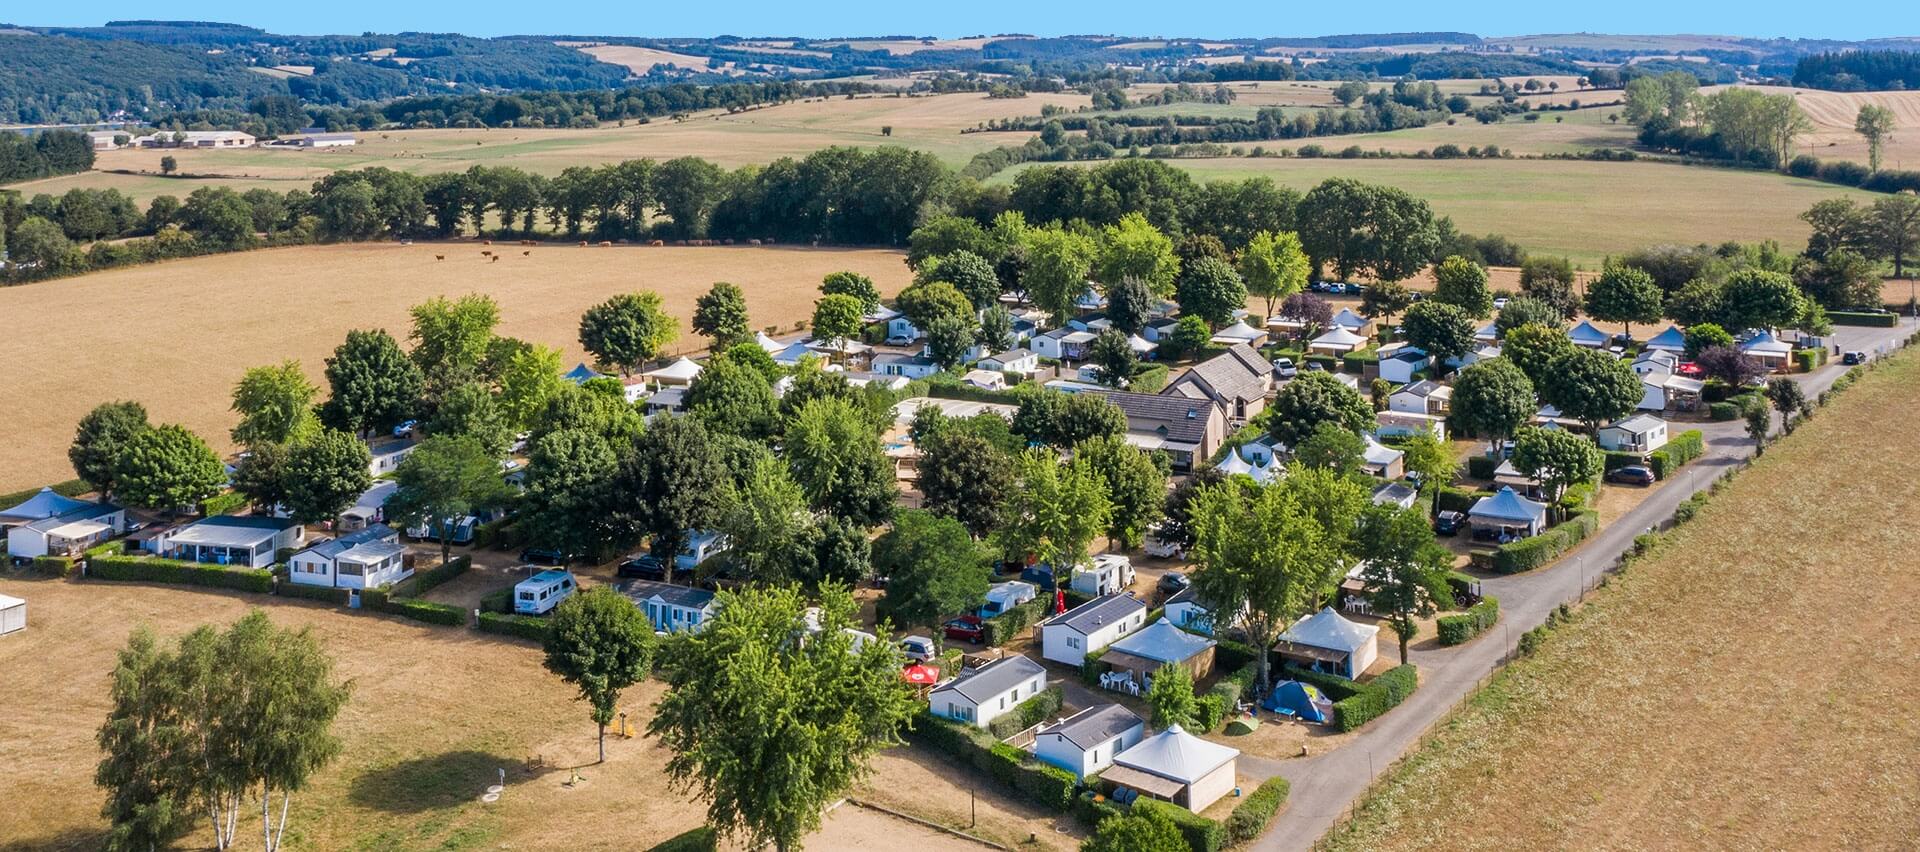 View of the Parc du Charouzech campsite in Aveyron